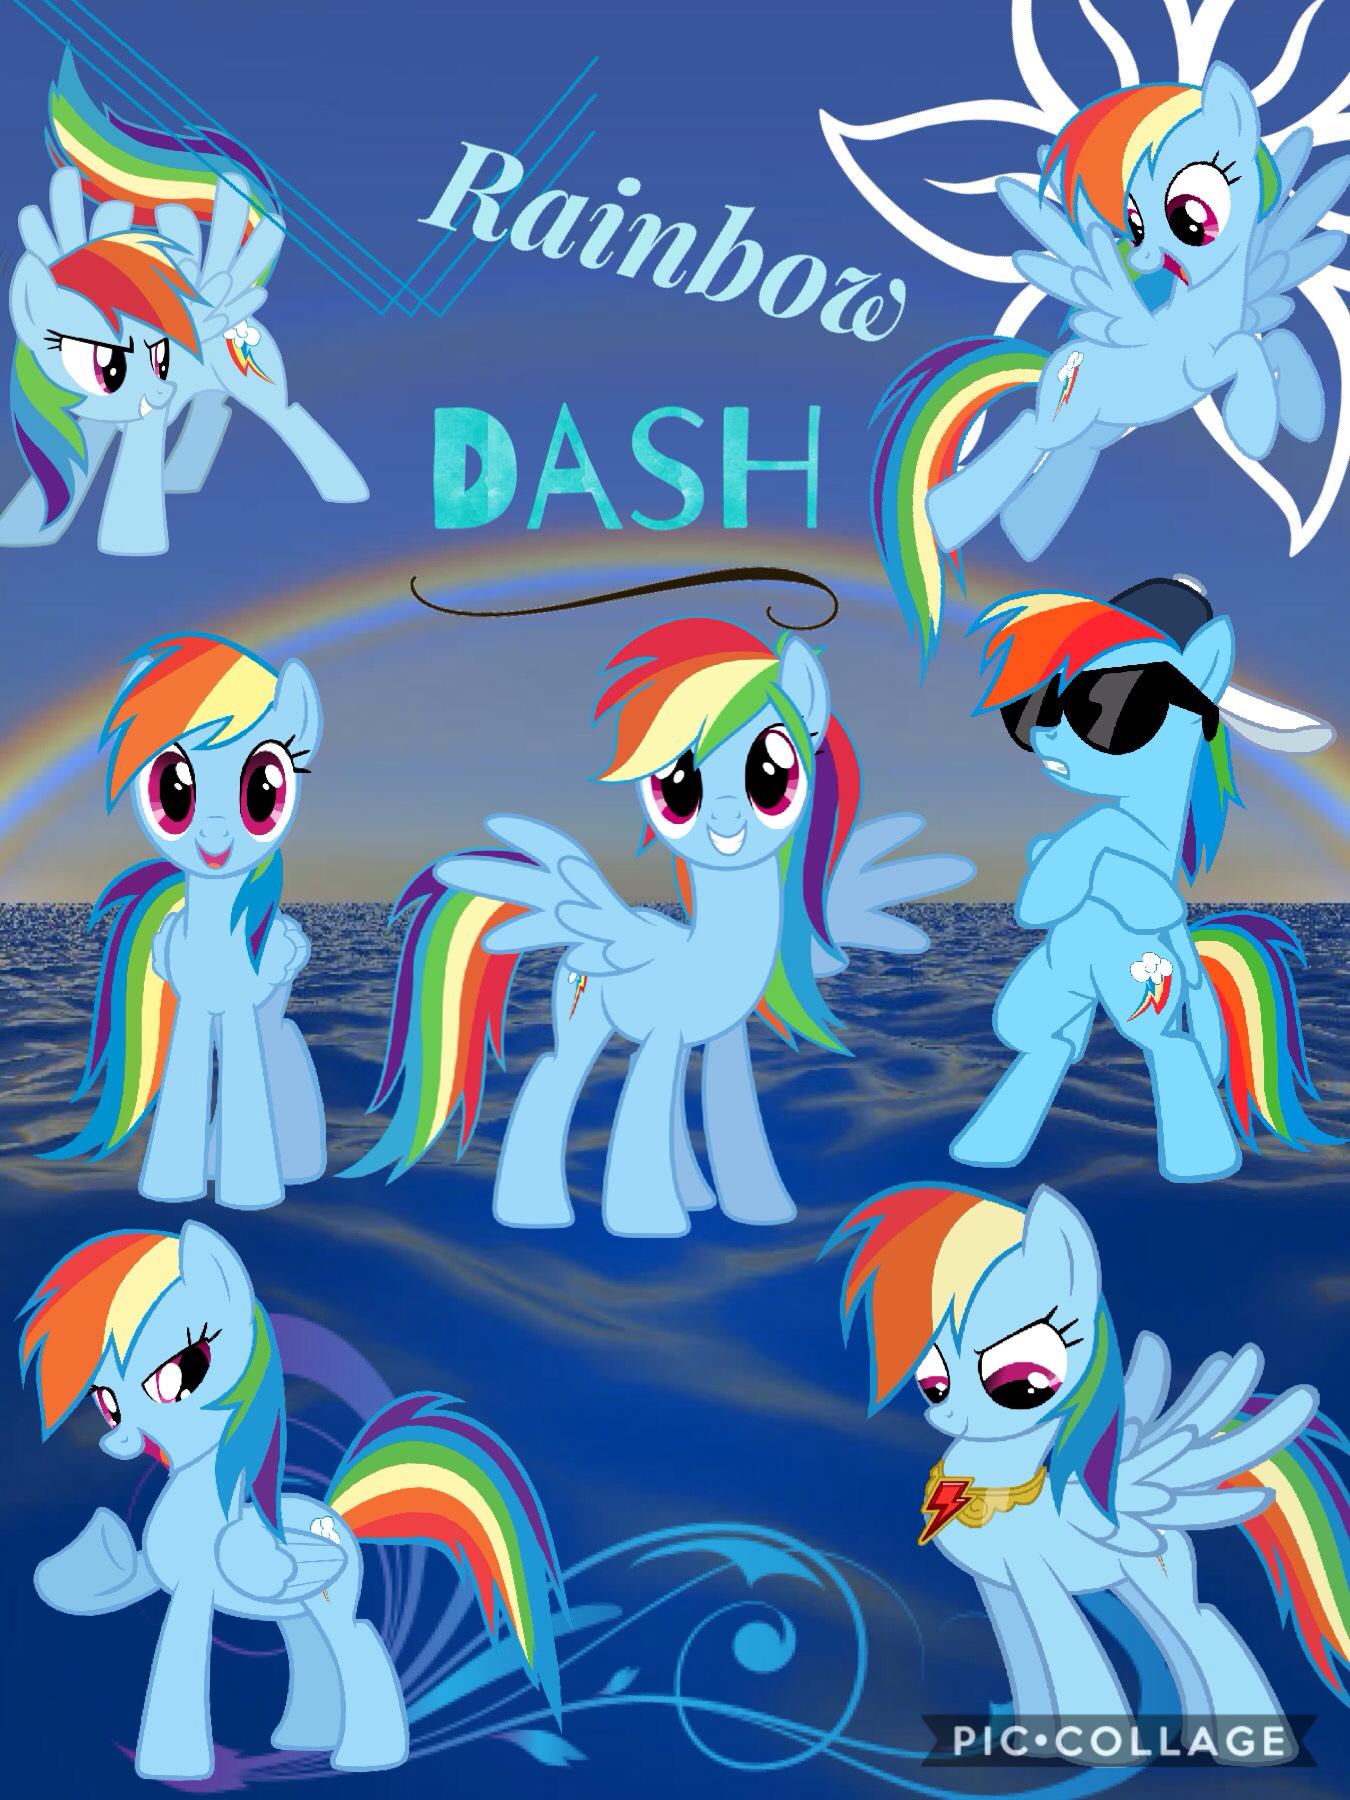 A little something for all the rainbow dash lovers